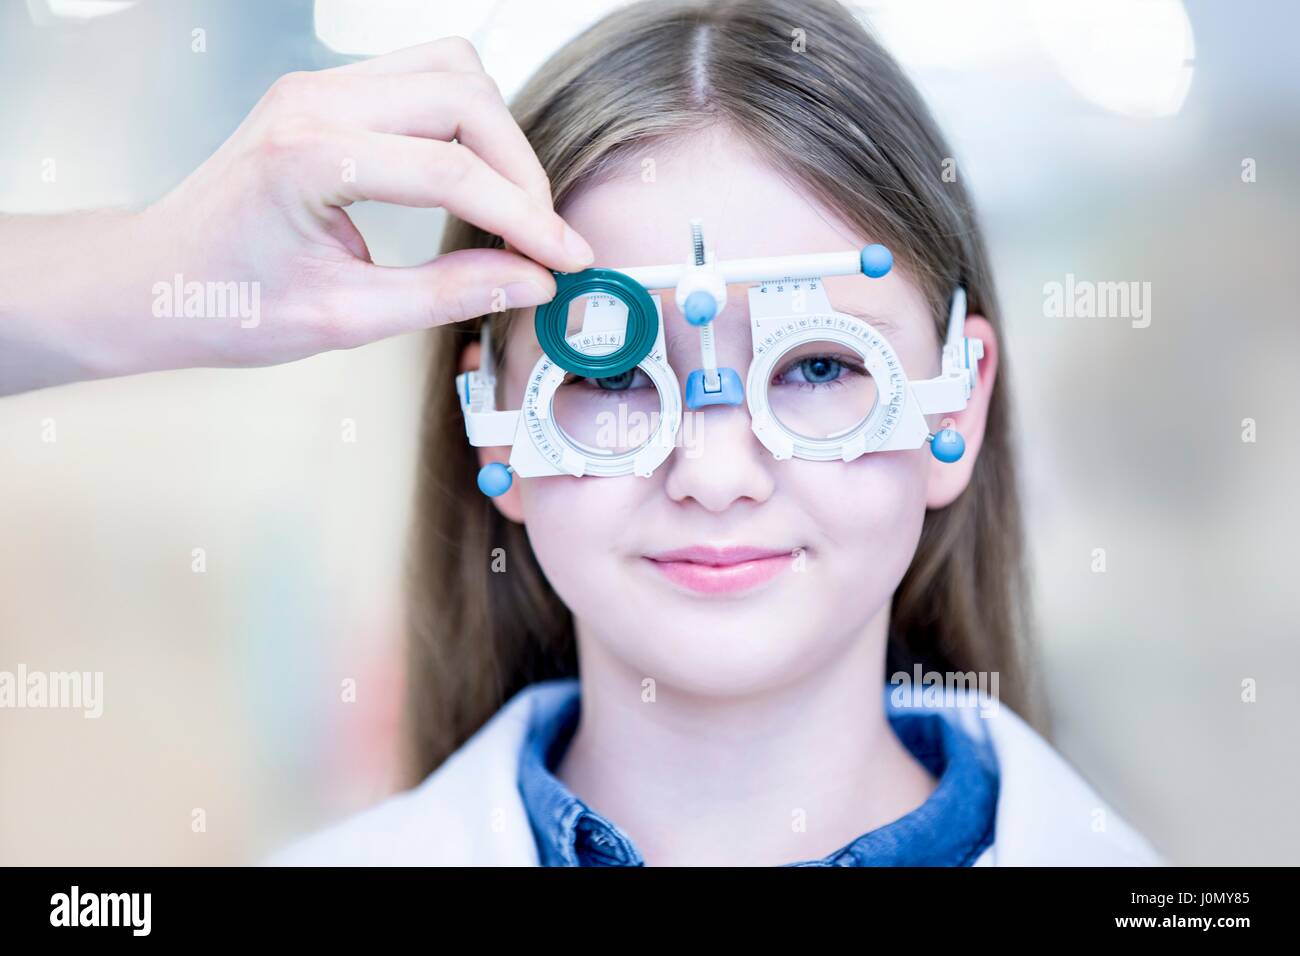 Portrait of girl wearing trial frame, close-up. Stock Photo